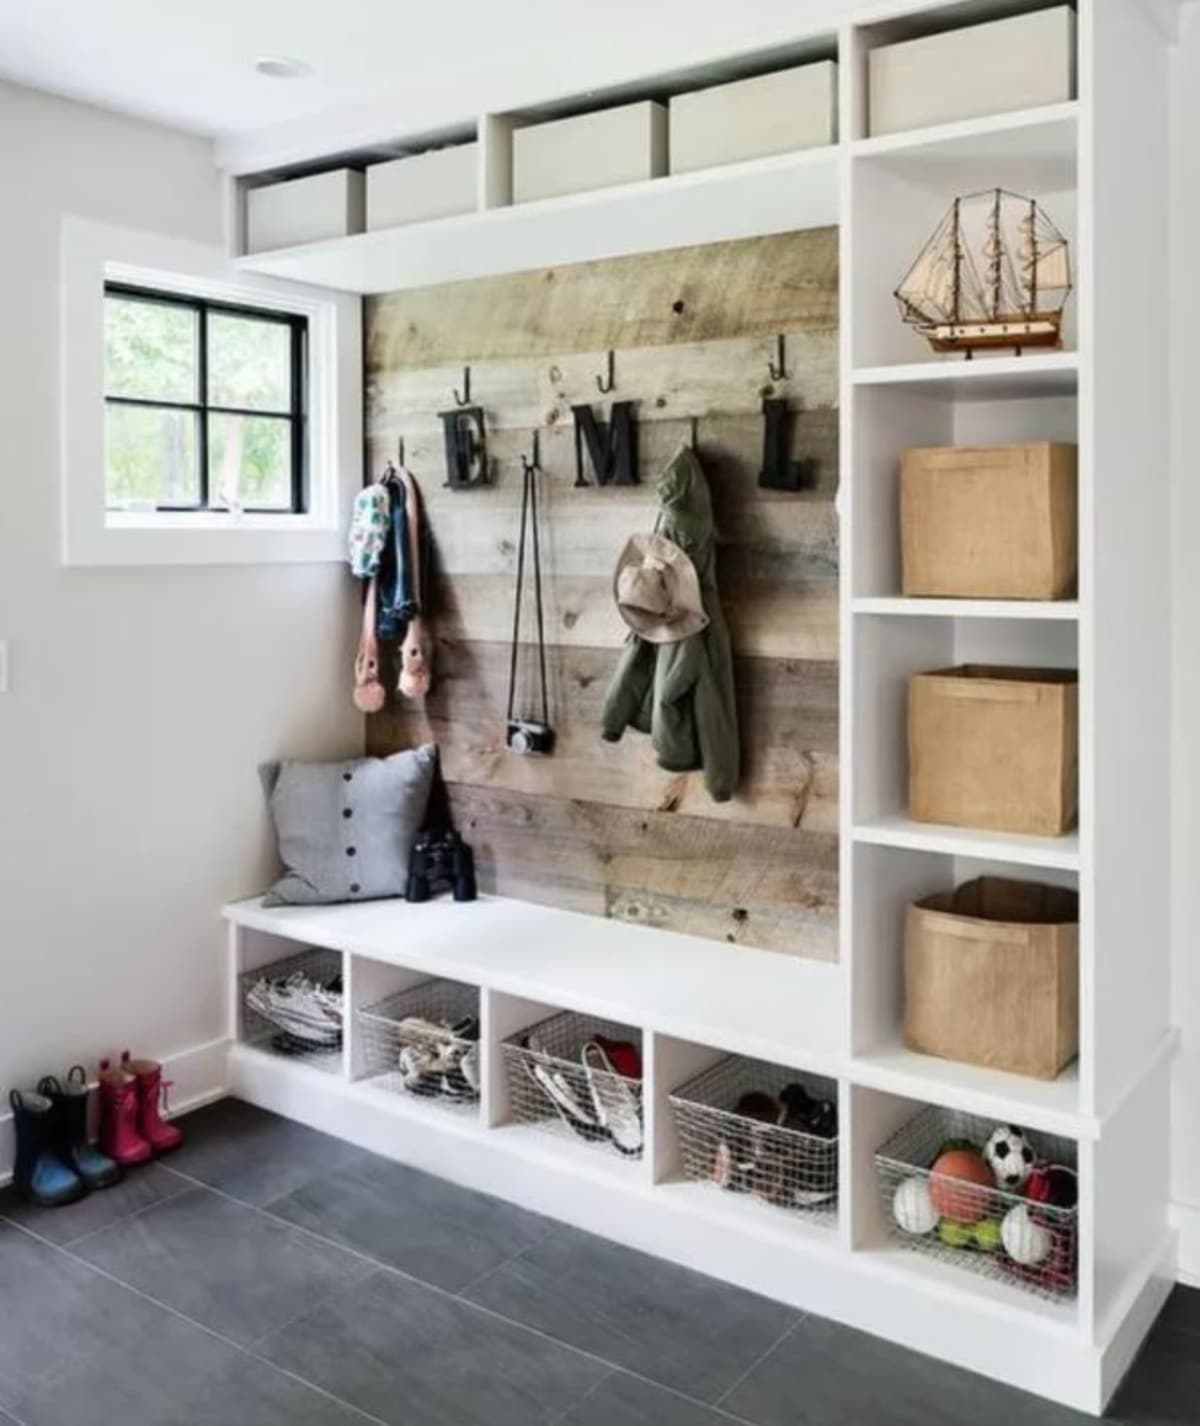 Coat hanger with other storage baskets in it